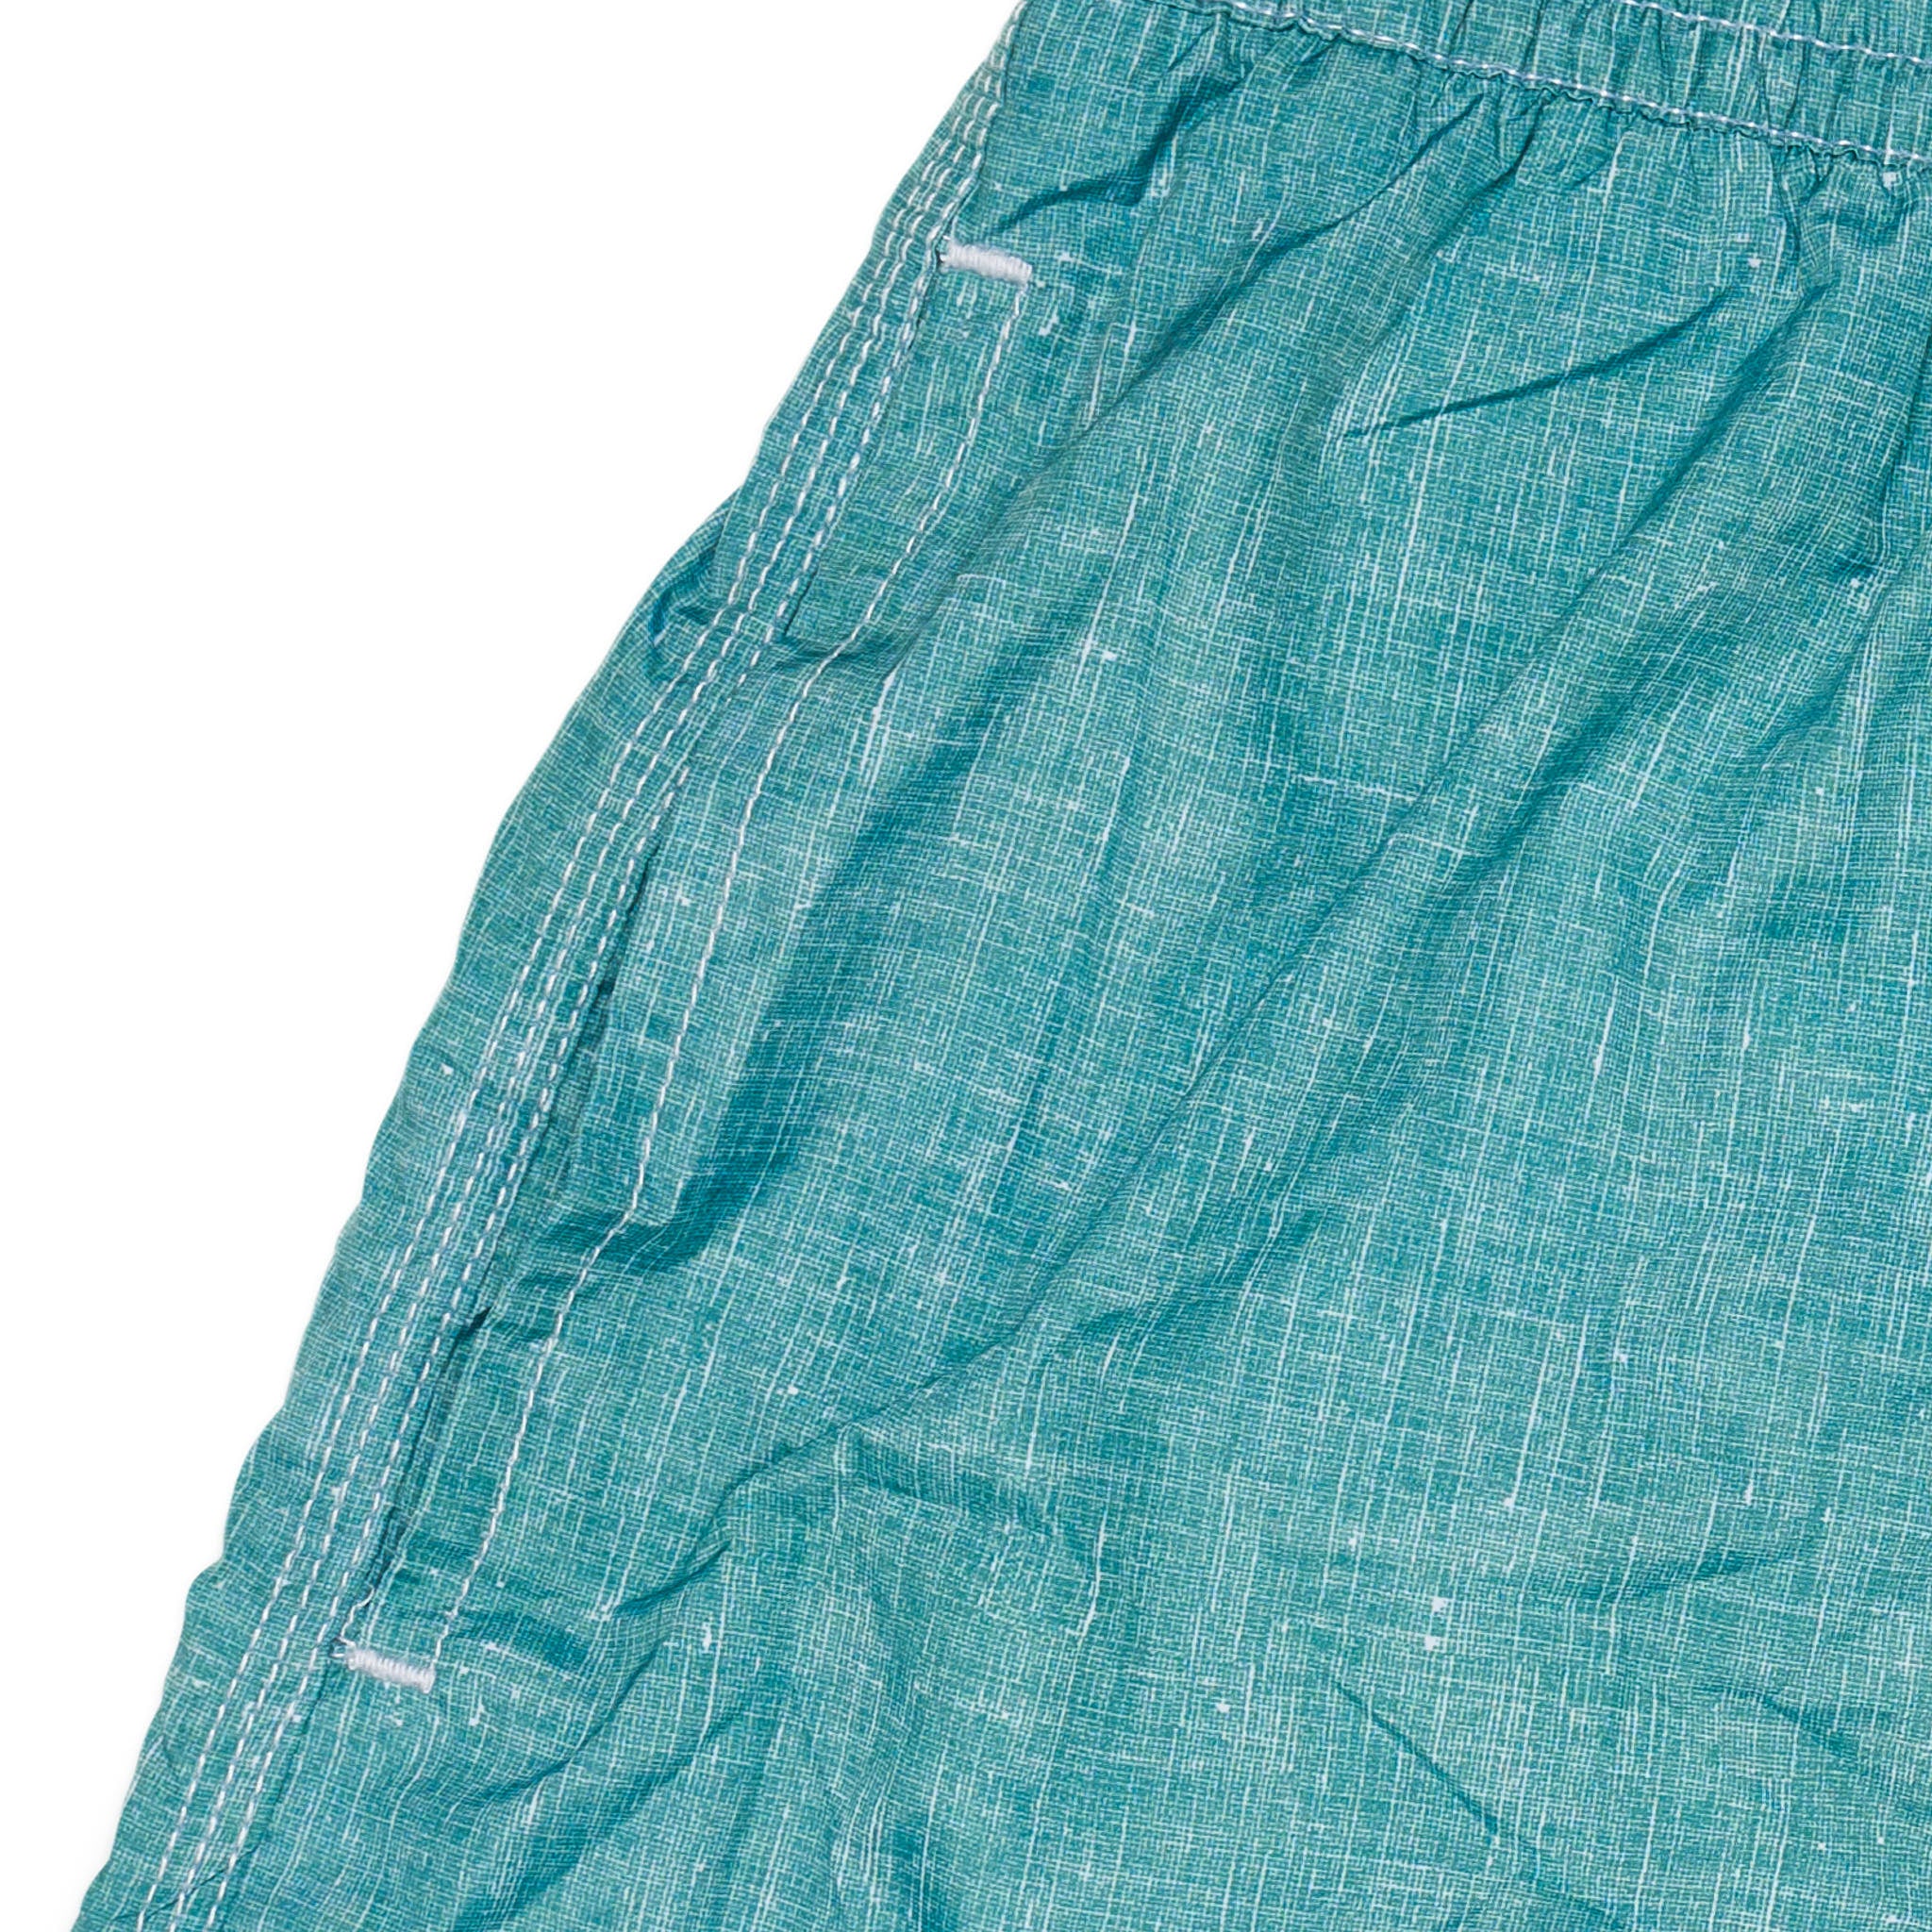 FEDELI Green Chambray Printed Madeira Airstop Swim Shorts Trunks NEW Size 3XL FEDELI